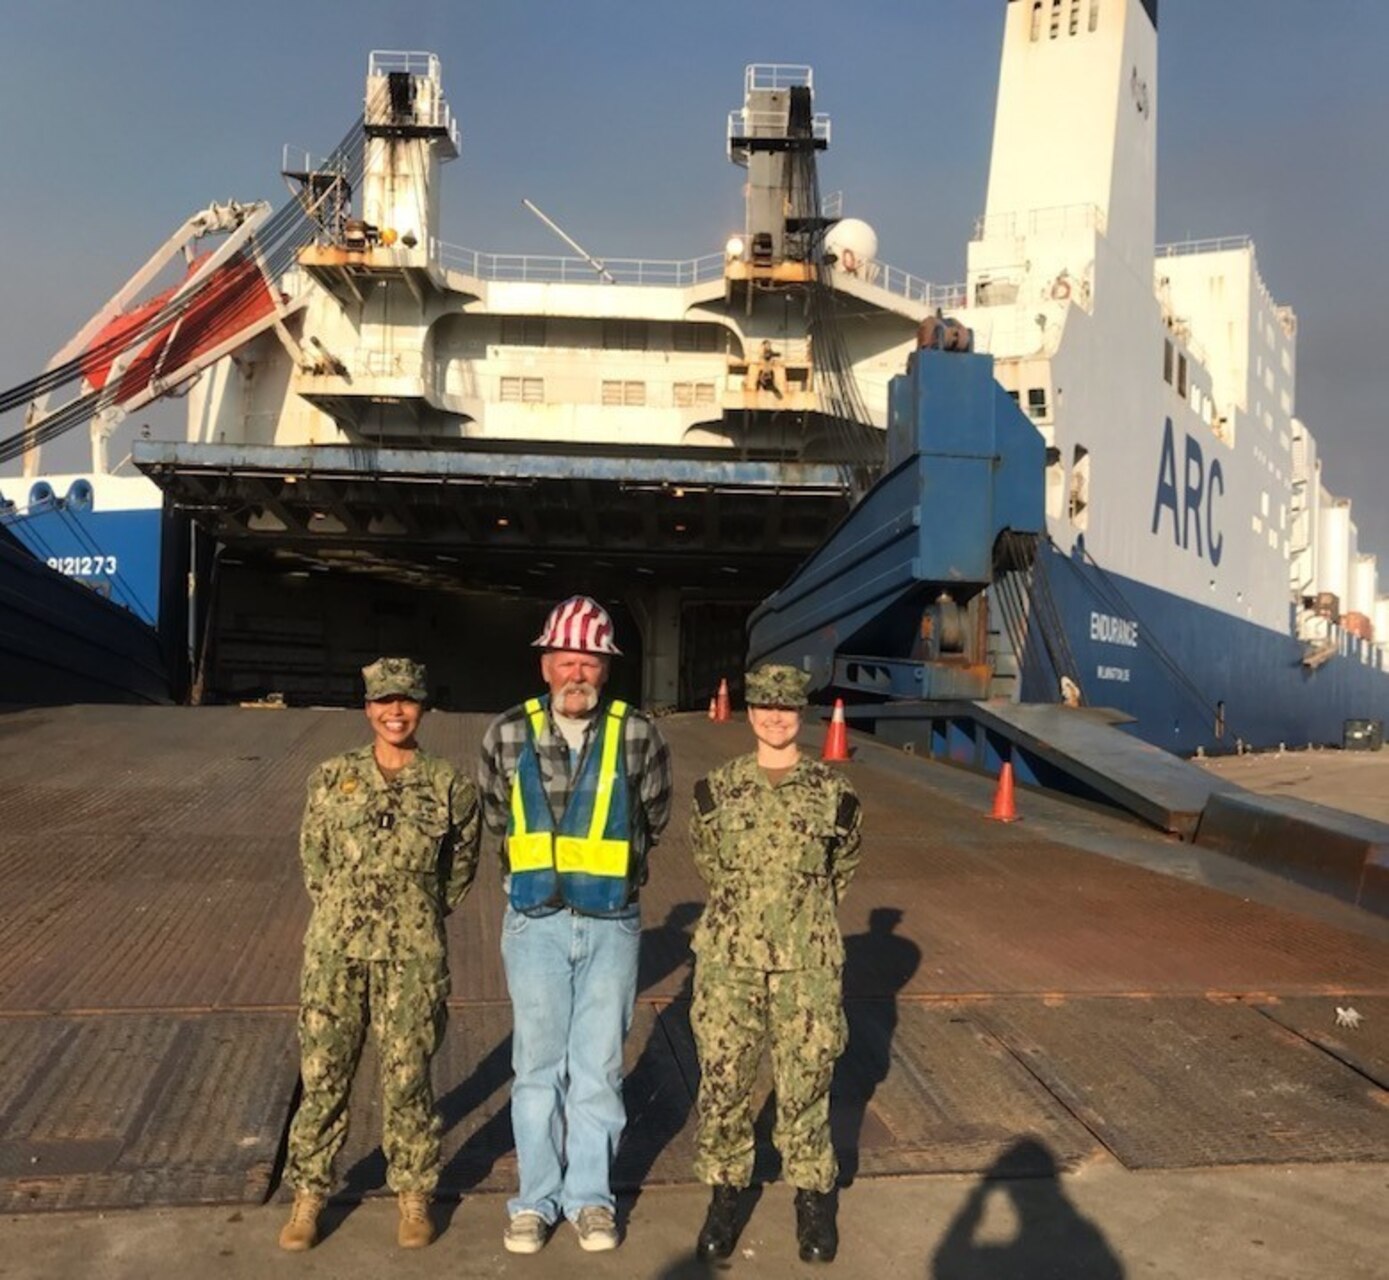 Military Sealift Command in March charted American Roll-on Roll-Off Carrier (ARC) ship MV Endurance to load U.S. Army cargo at the Port of Beaumont in Texas and embarked two female tactical advisors (TACADs) to oversee the voyage to Europe.